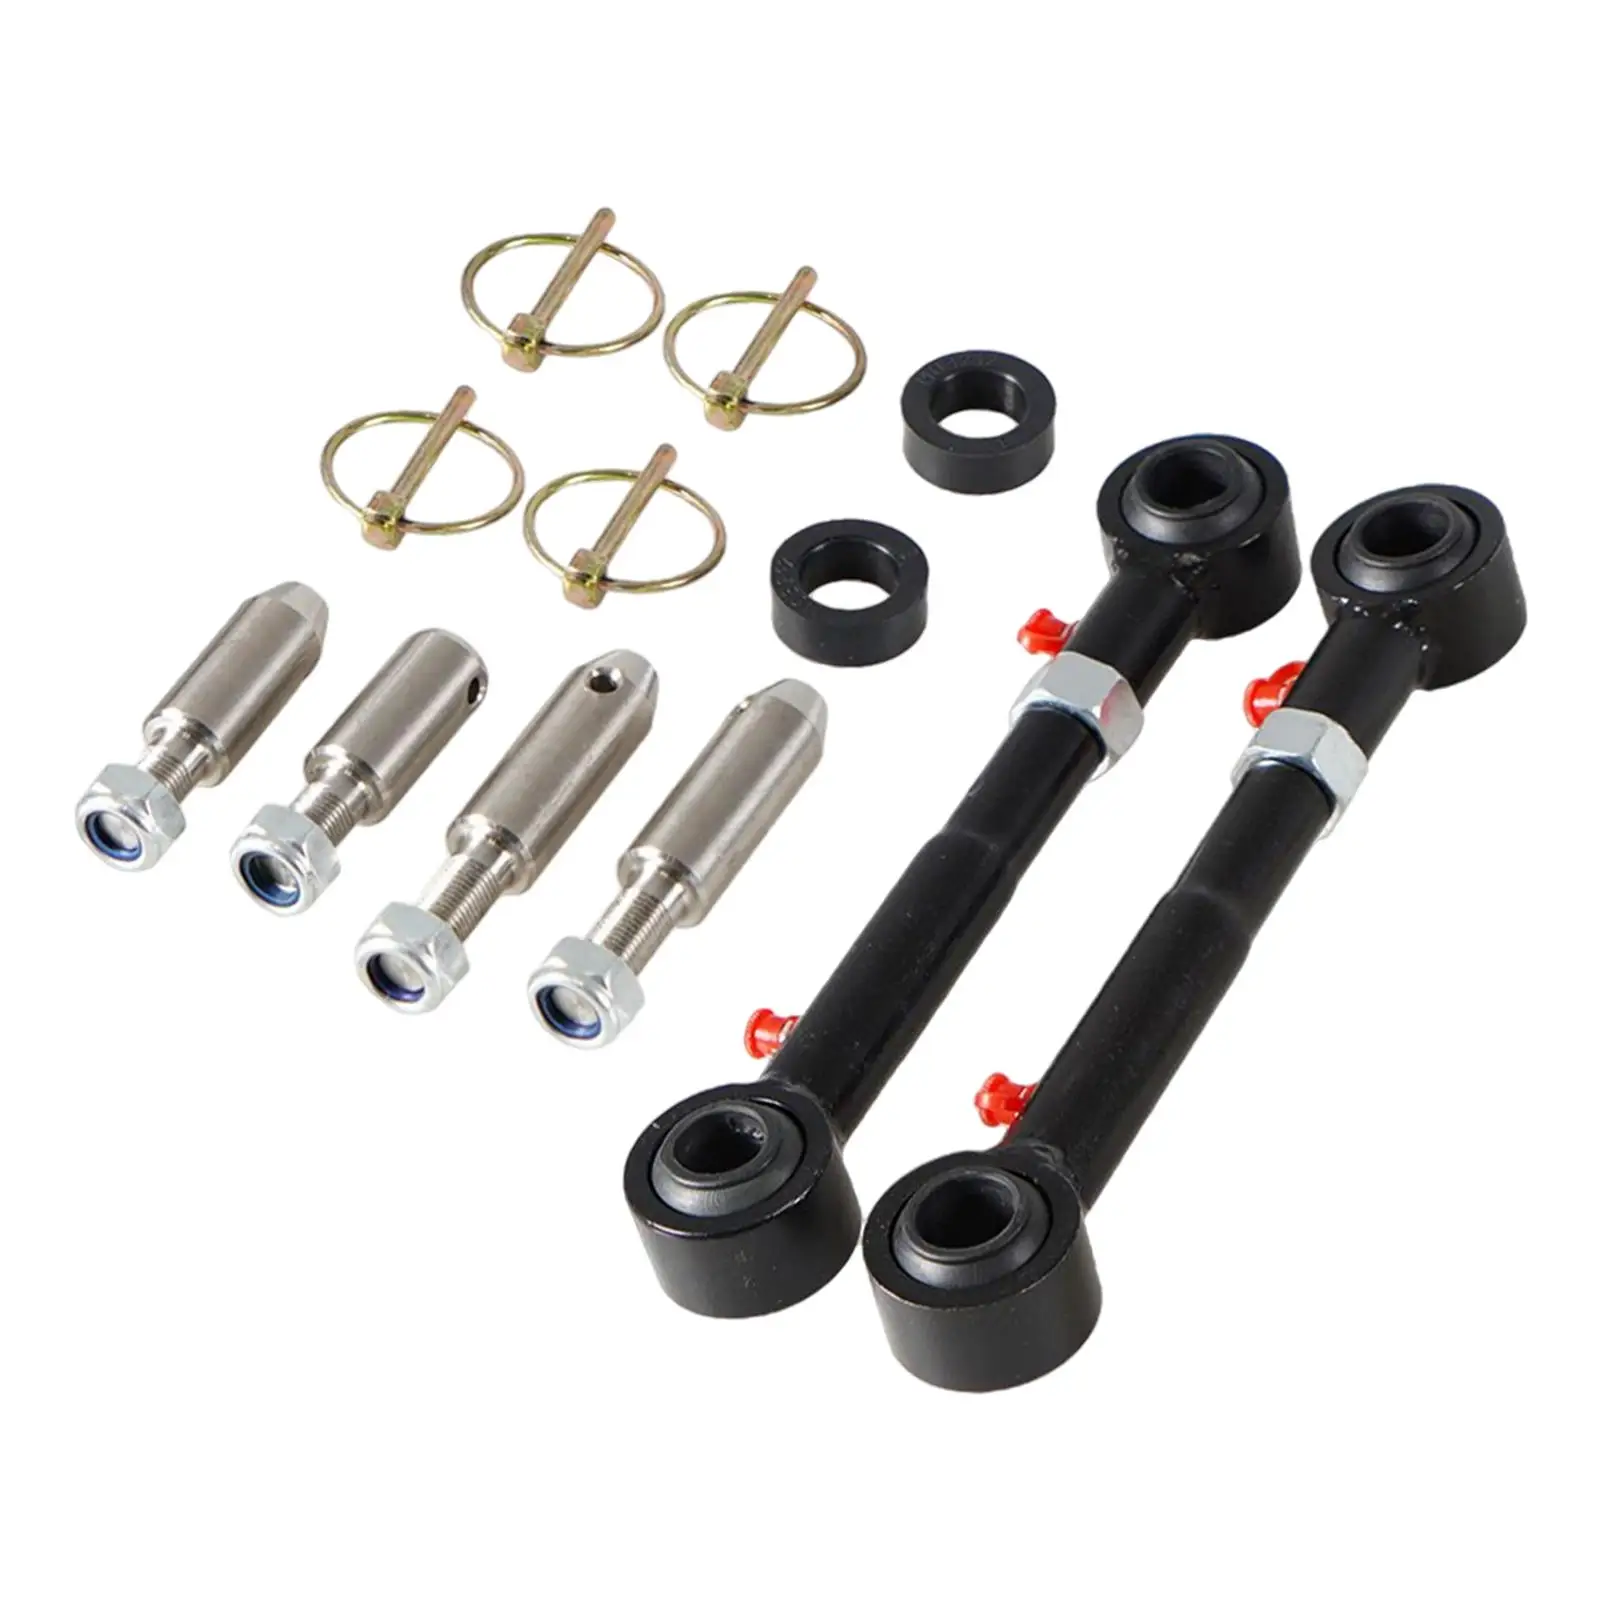 Adjustable Front Sway Bar Links Disconnects Stainless Steel for Jeep Wrangler JK Jku 2/4 Doors 2007-18 Parts Replaces Car